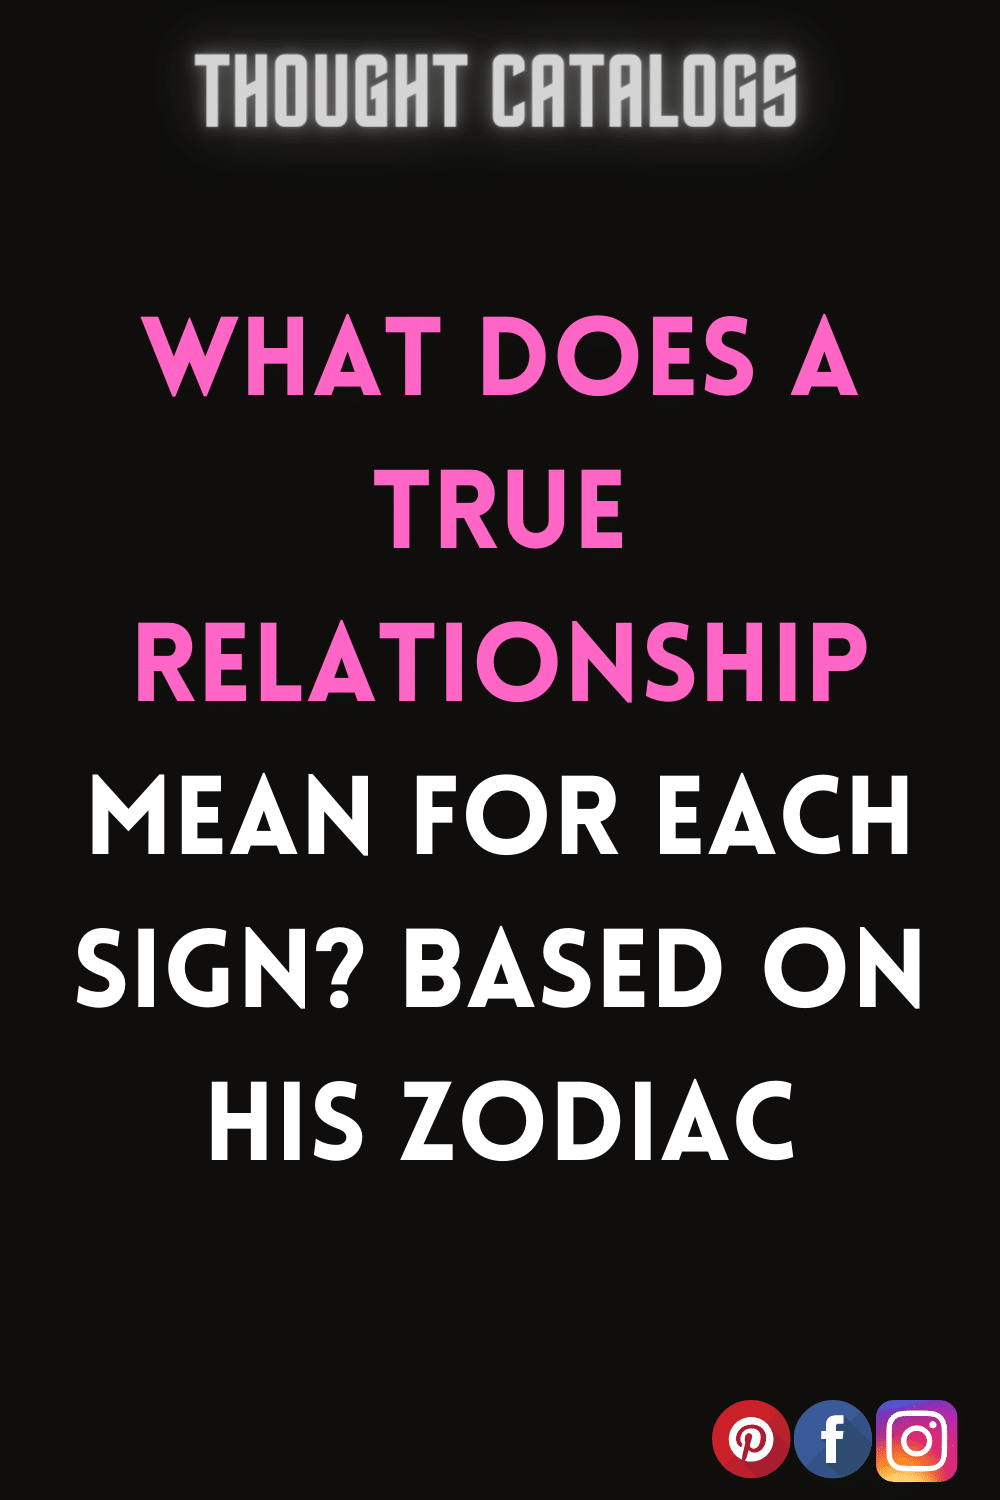 What Does A True Relationship Mean For Each Sign? Based On His Zodiac